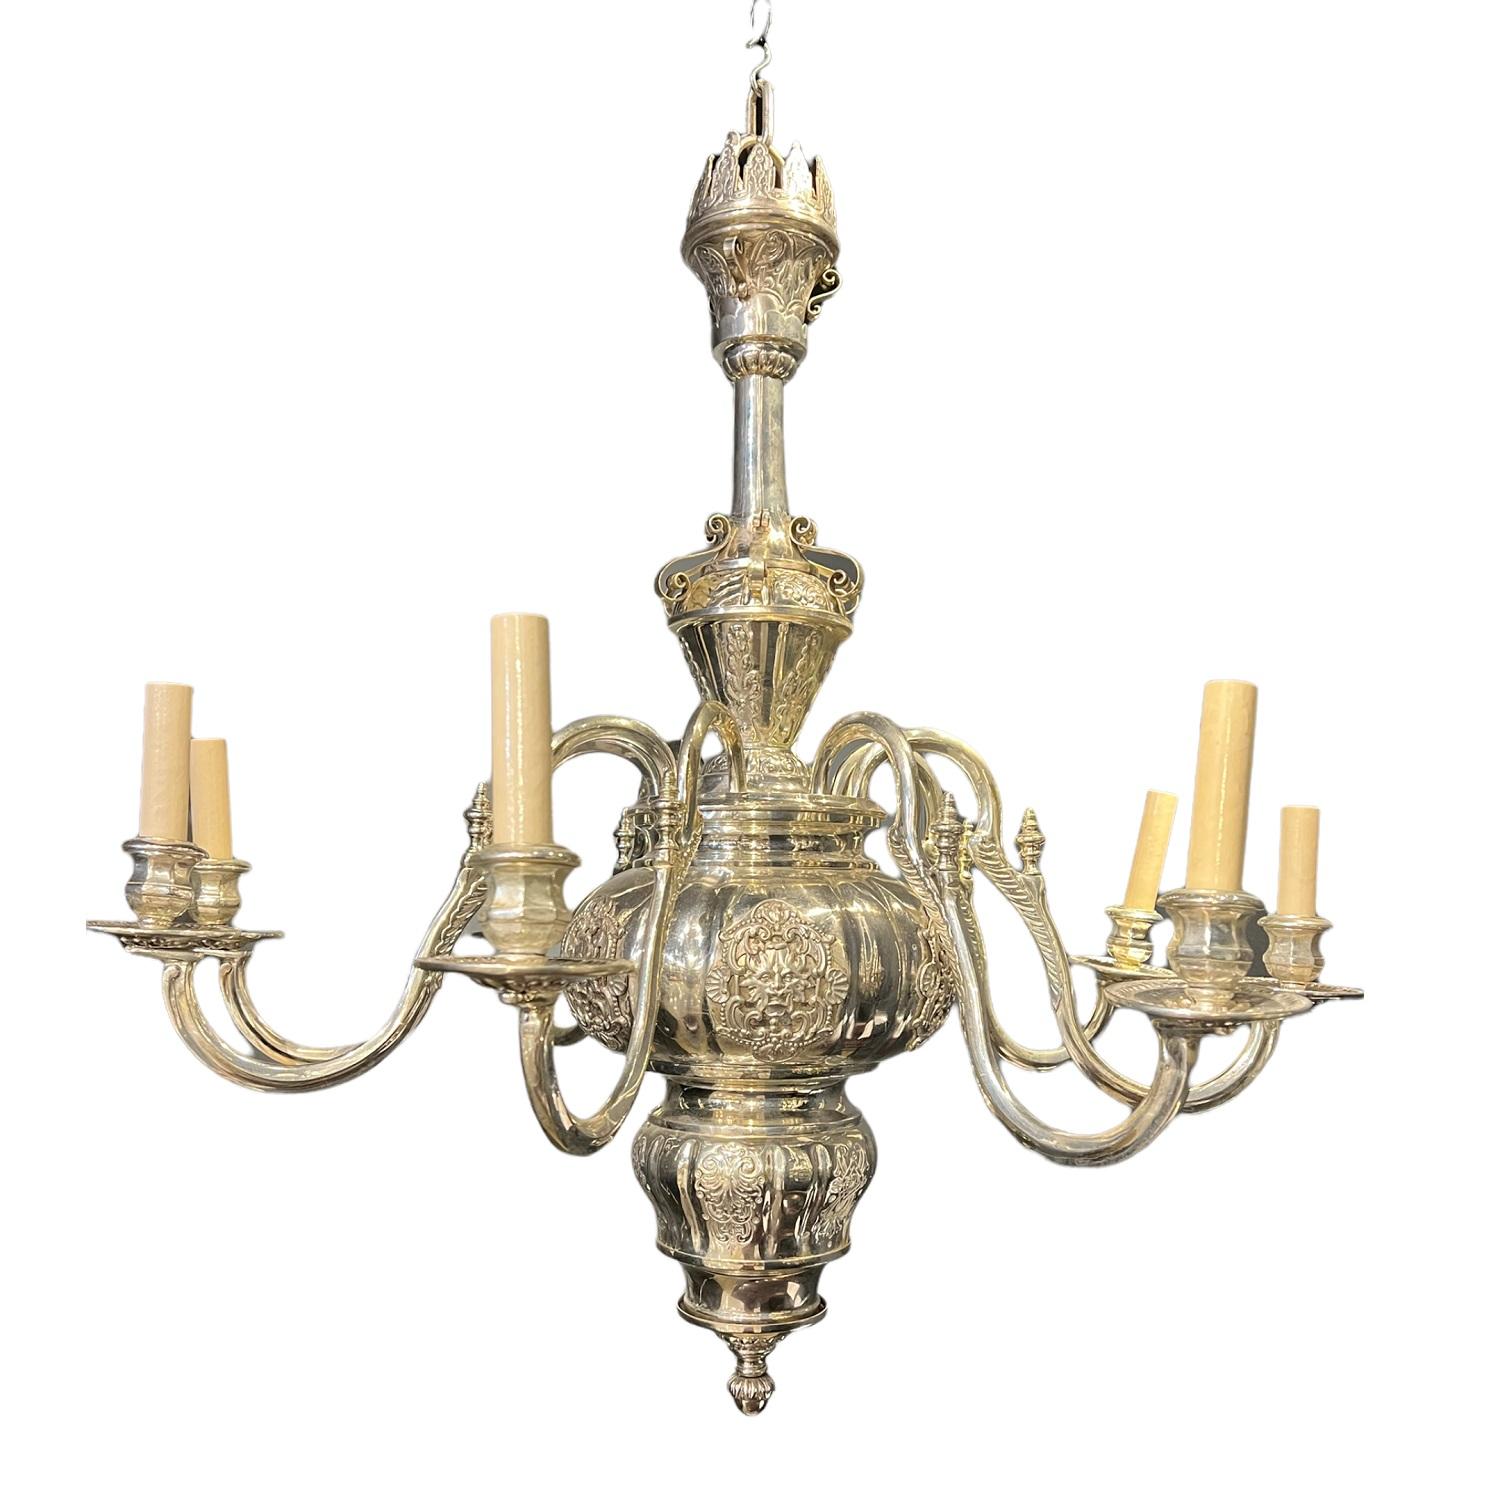 A silver plated Caldwell, 8 light medium size chandelier with an interesting design on the body, circa 1900s. In very good vintage condition.

Dealer: G302YP